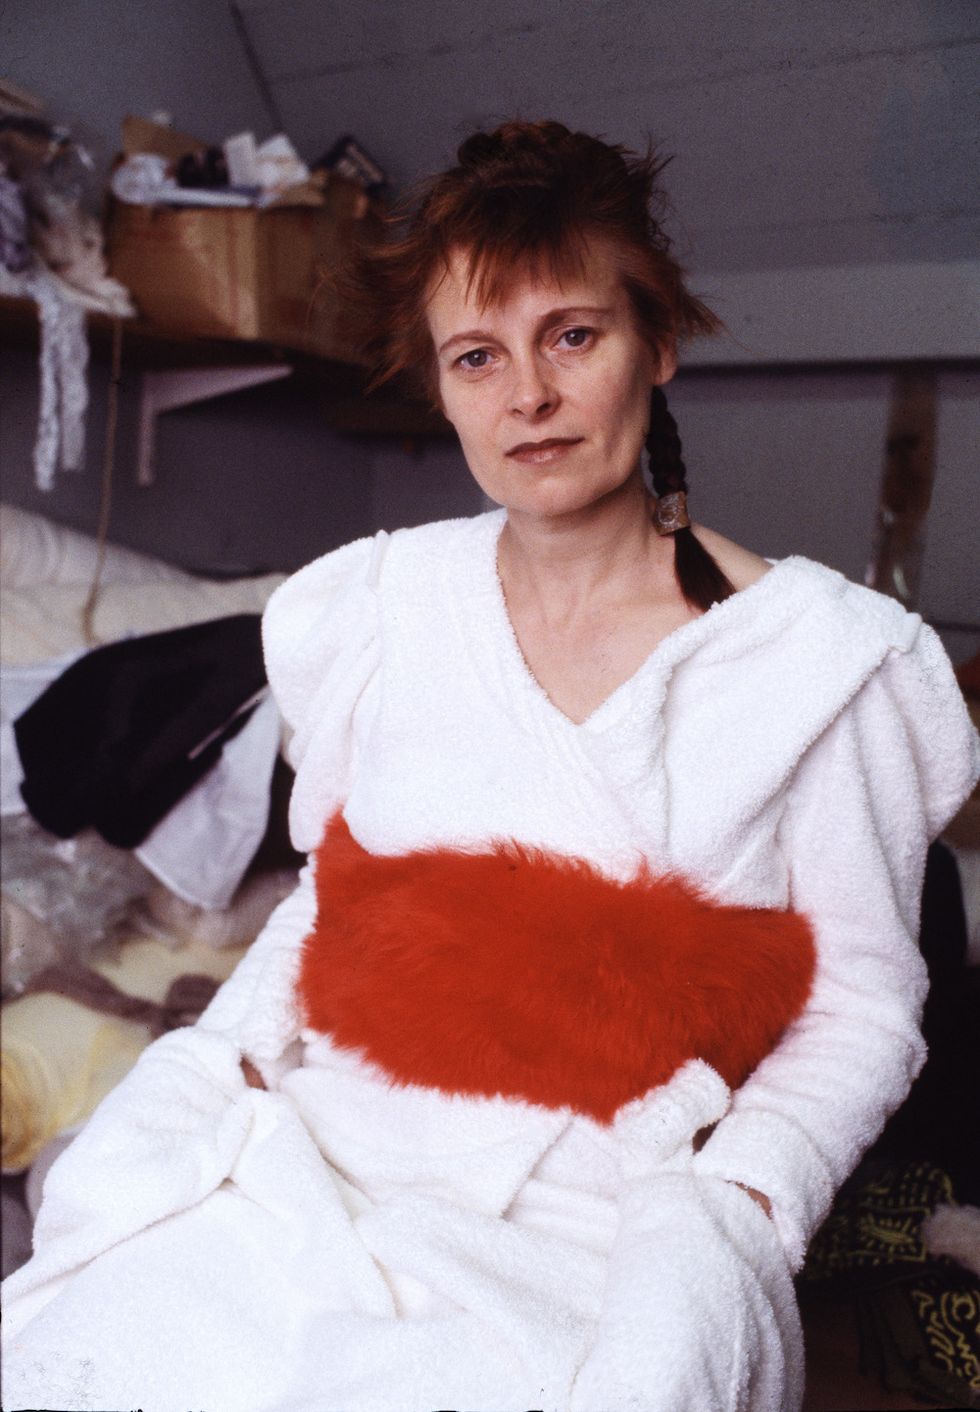 vivienne westwood at her atelier london early 1980s